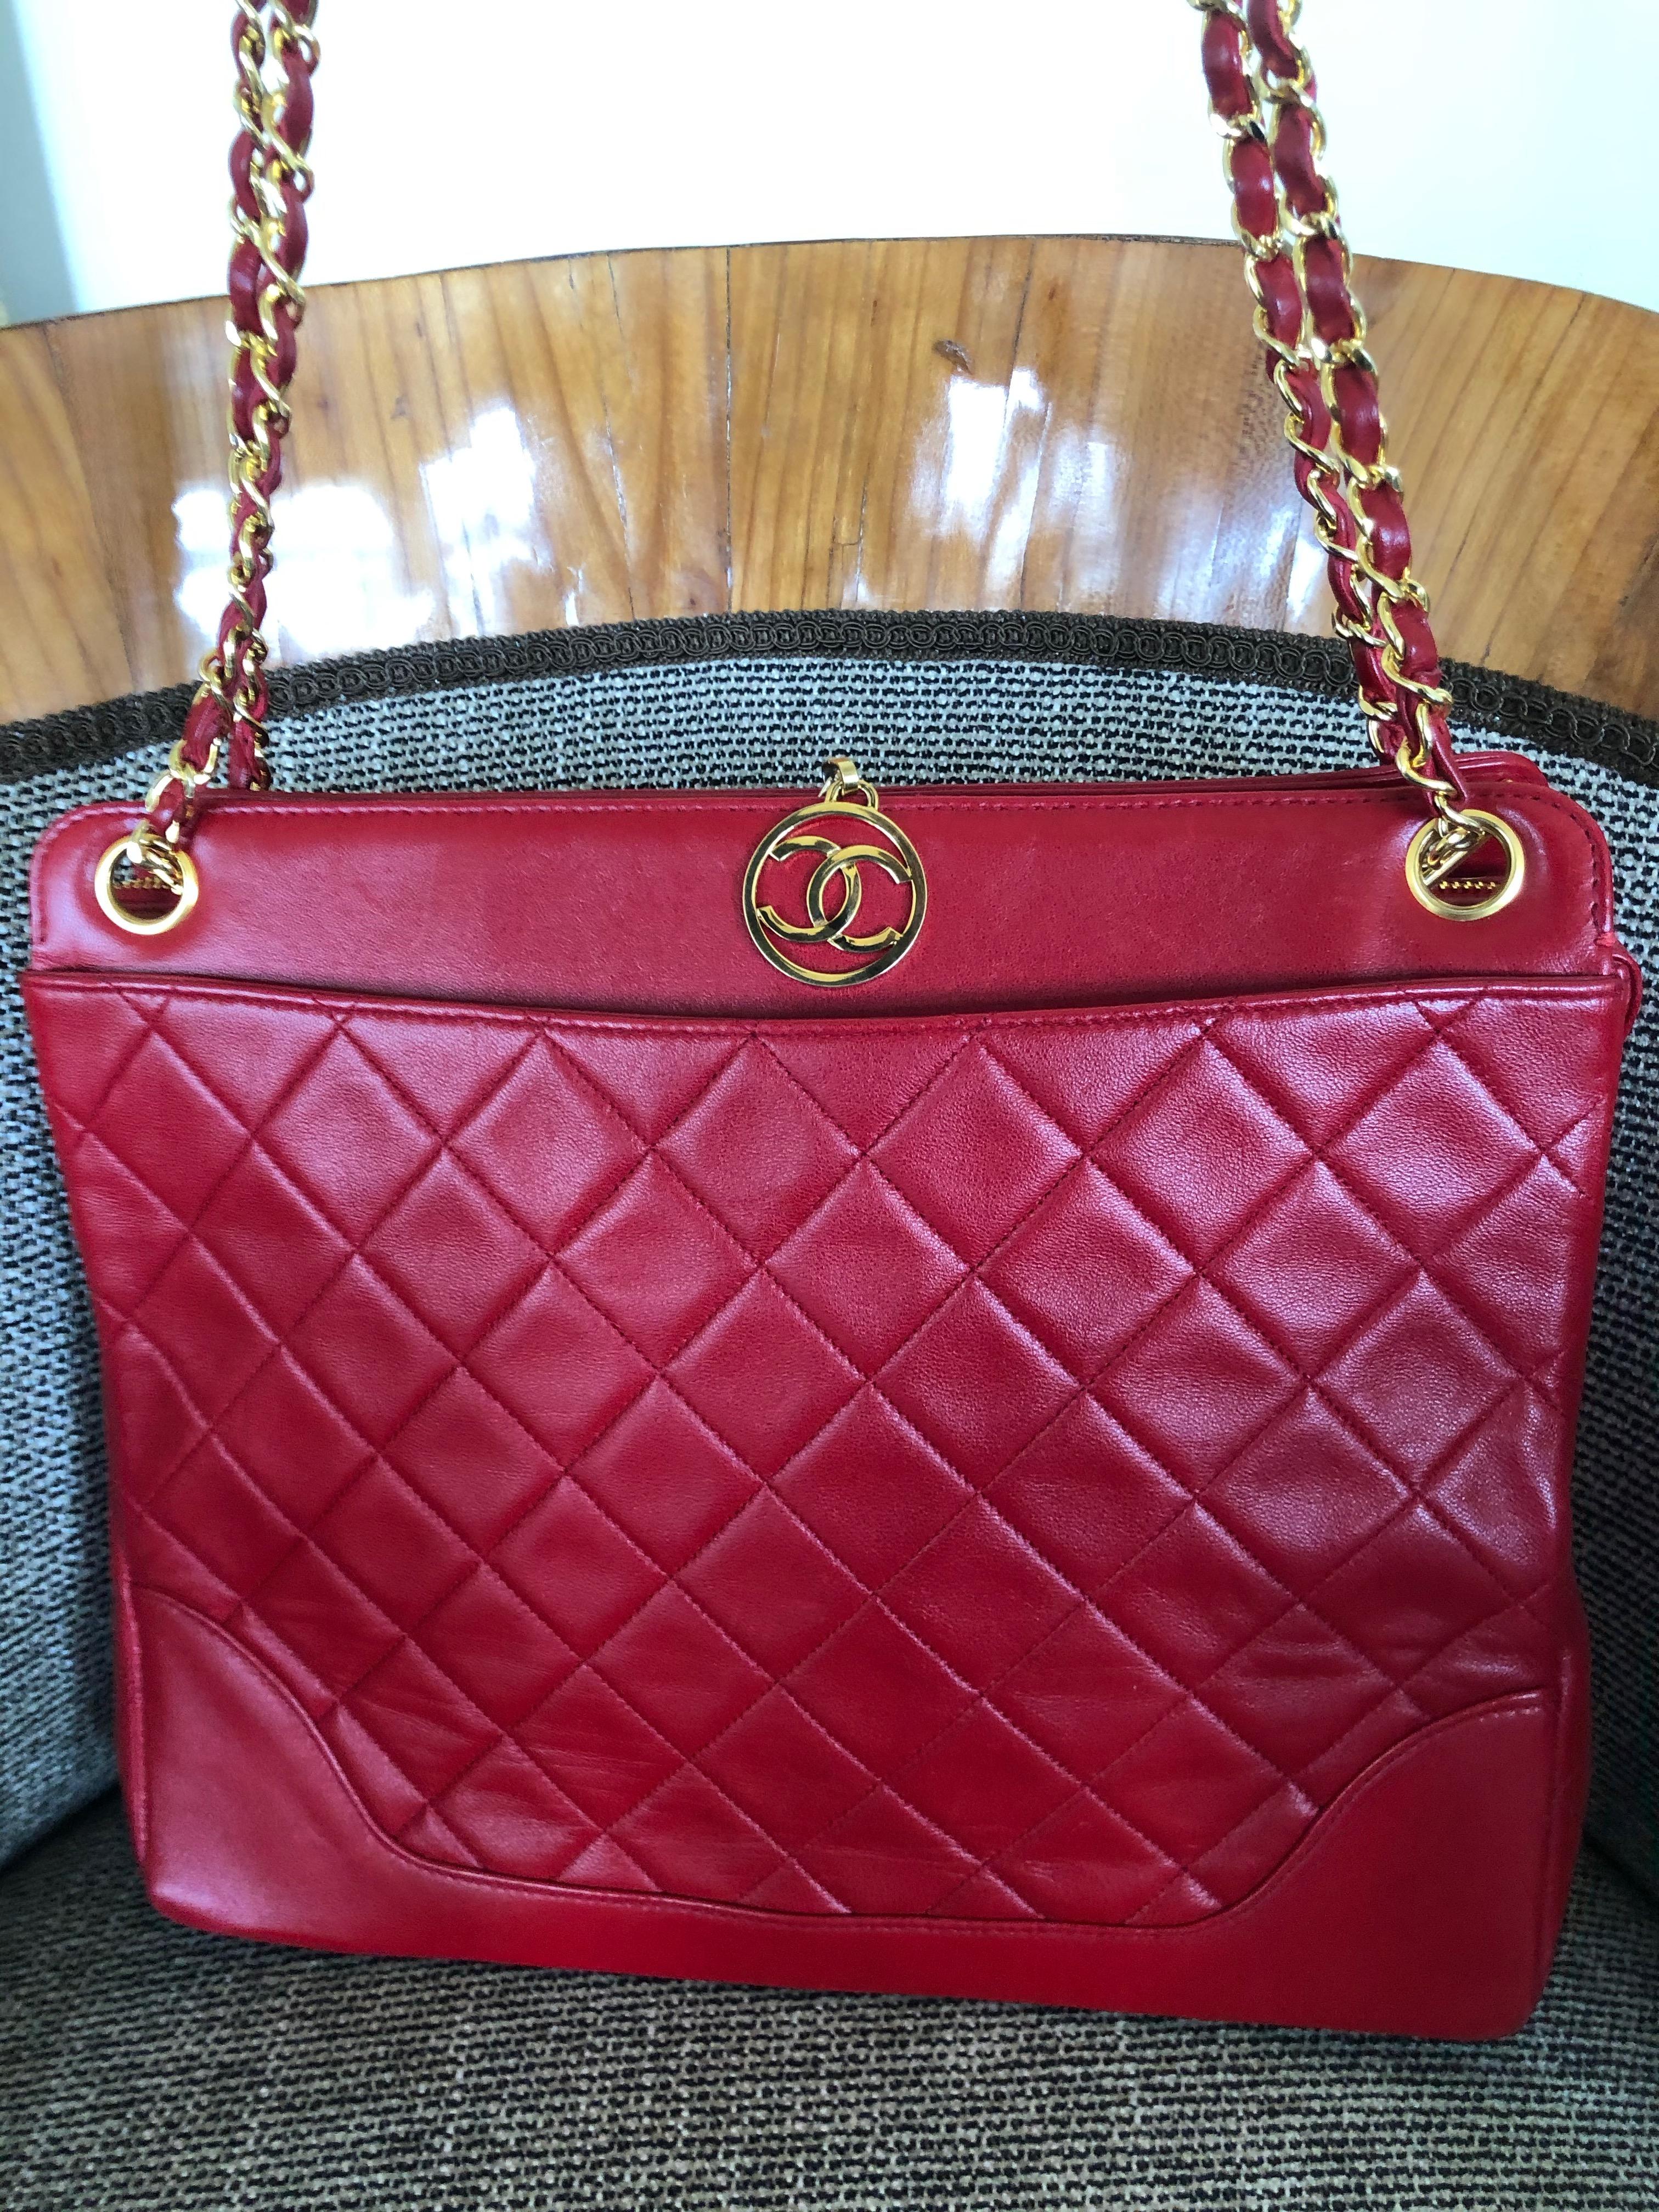 Chanel Tomato Red Vintage Lambskin Leather Quilted Tote Bag with Gold Hardware.
12